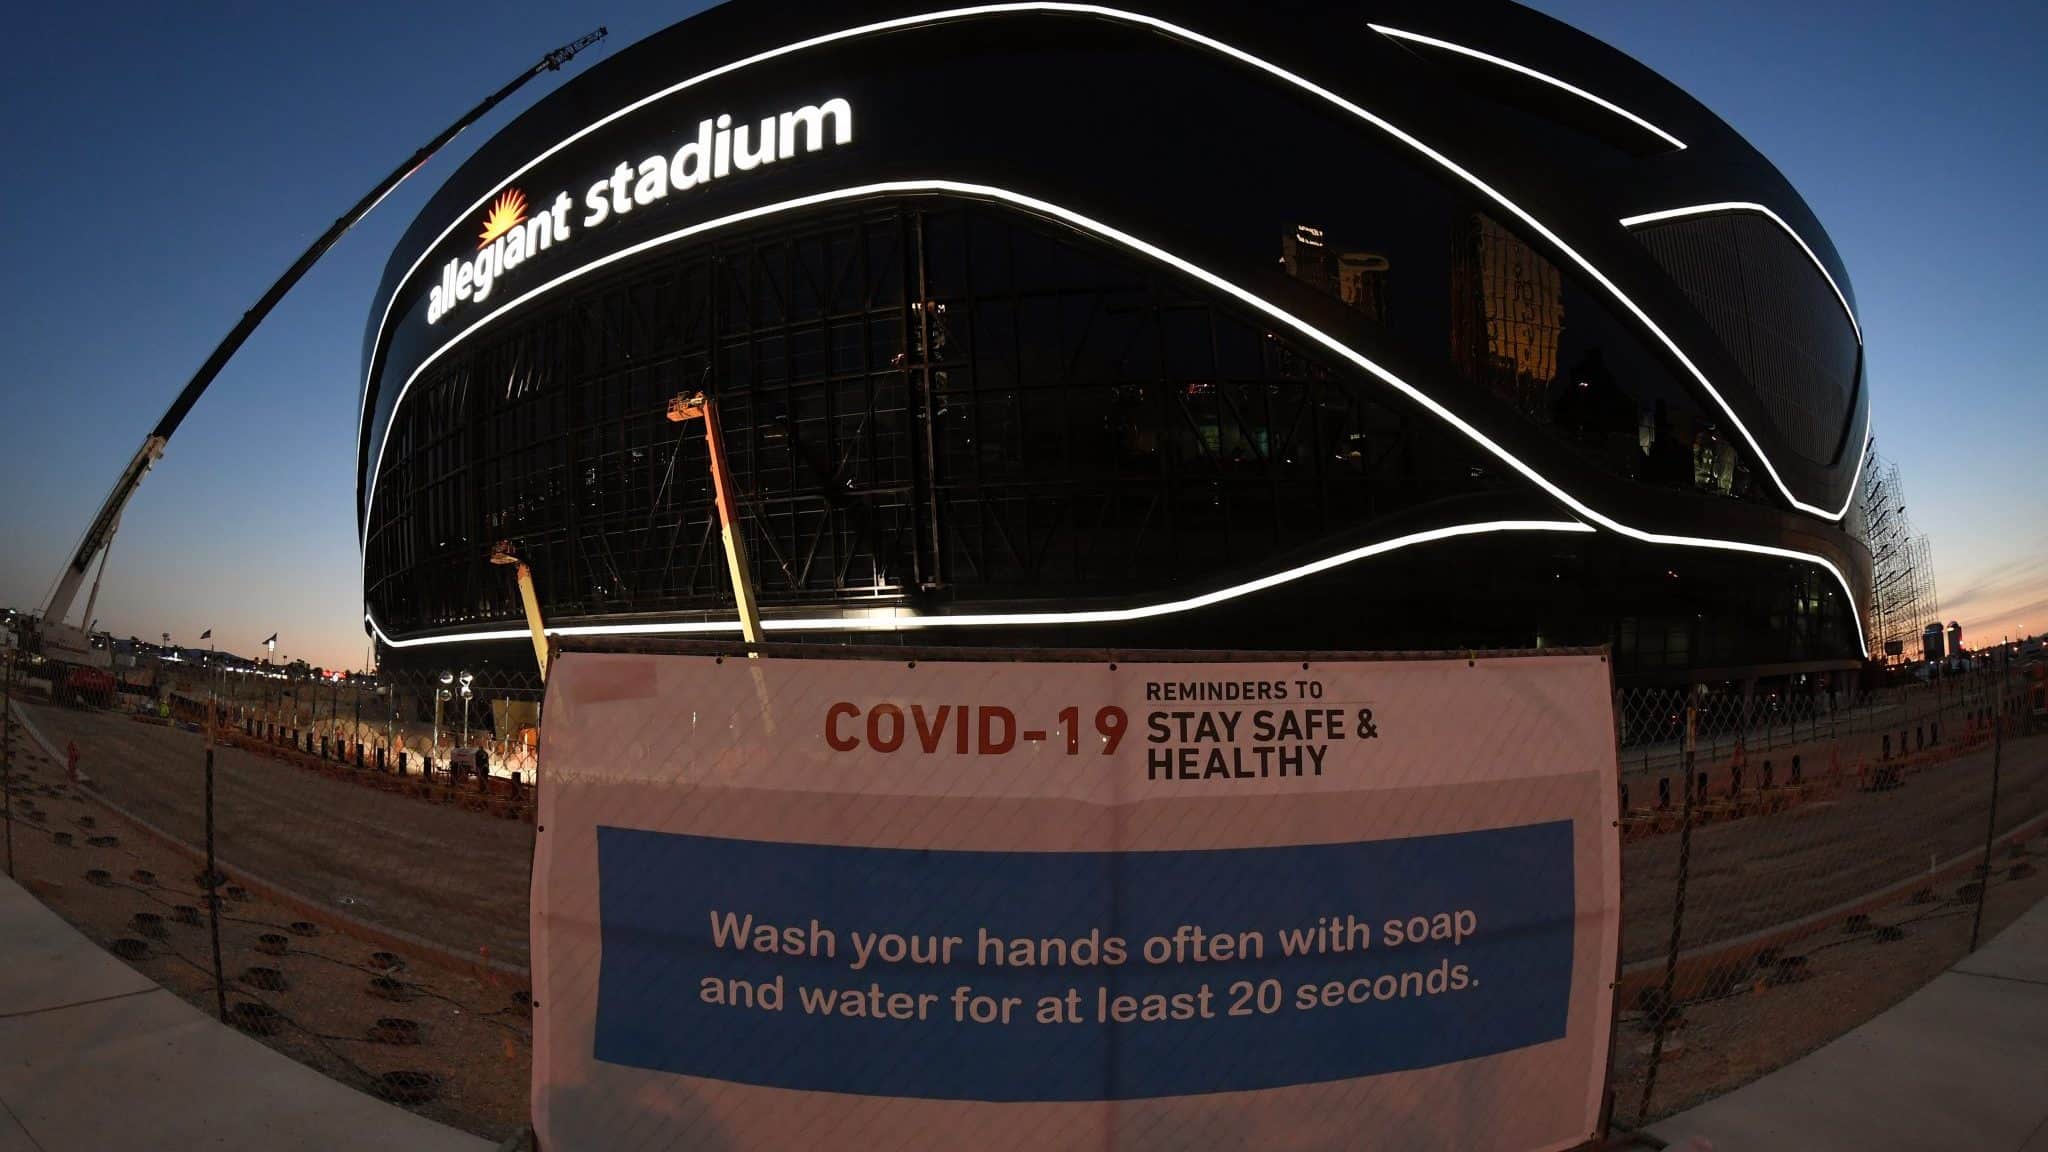 LAS VEGAS, NEVADA - APRIL 23: (EDITORS NOTE: This image was shot with a fisheye lens.) A sign with guidelines for how to stay safe from the coronavirus is posted on a fence while crews test out architectural light ribbons and exterior sign lighting as construction continues at Allegiant Stadium, the USD 2 billion, glass-domed future home of the Las Vegas Raiders on April 23, 2020 in Las Vegas, Nevada. The Raiders and the UNLV Rebels football teams are scheduled to begin play at the 65,000-seat facility in their 2020 seasons. The World Health Organization declared the coronavirus (COVID-19) a pandemic on March 11th.